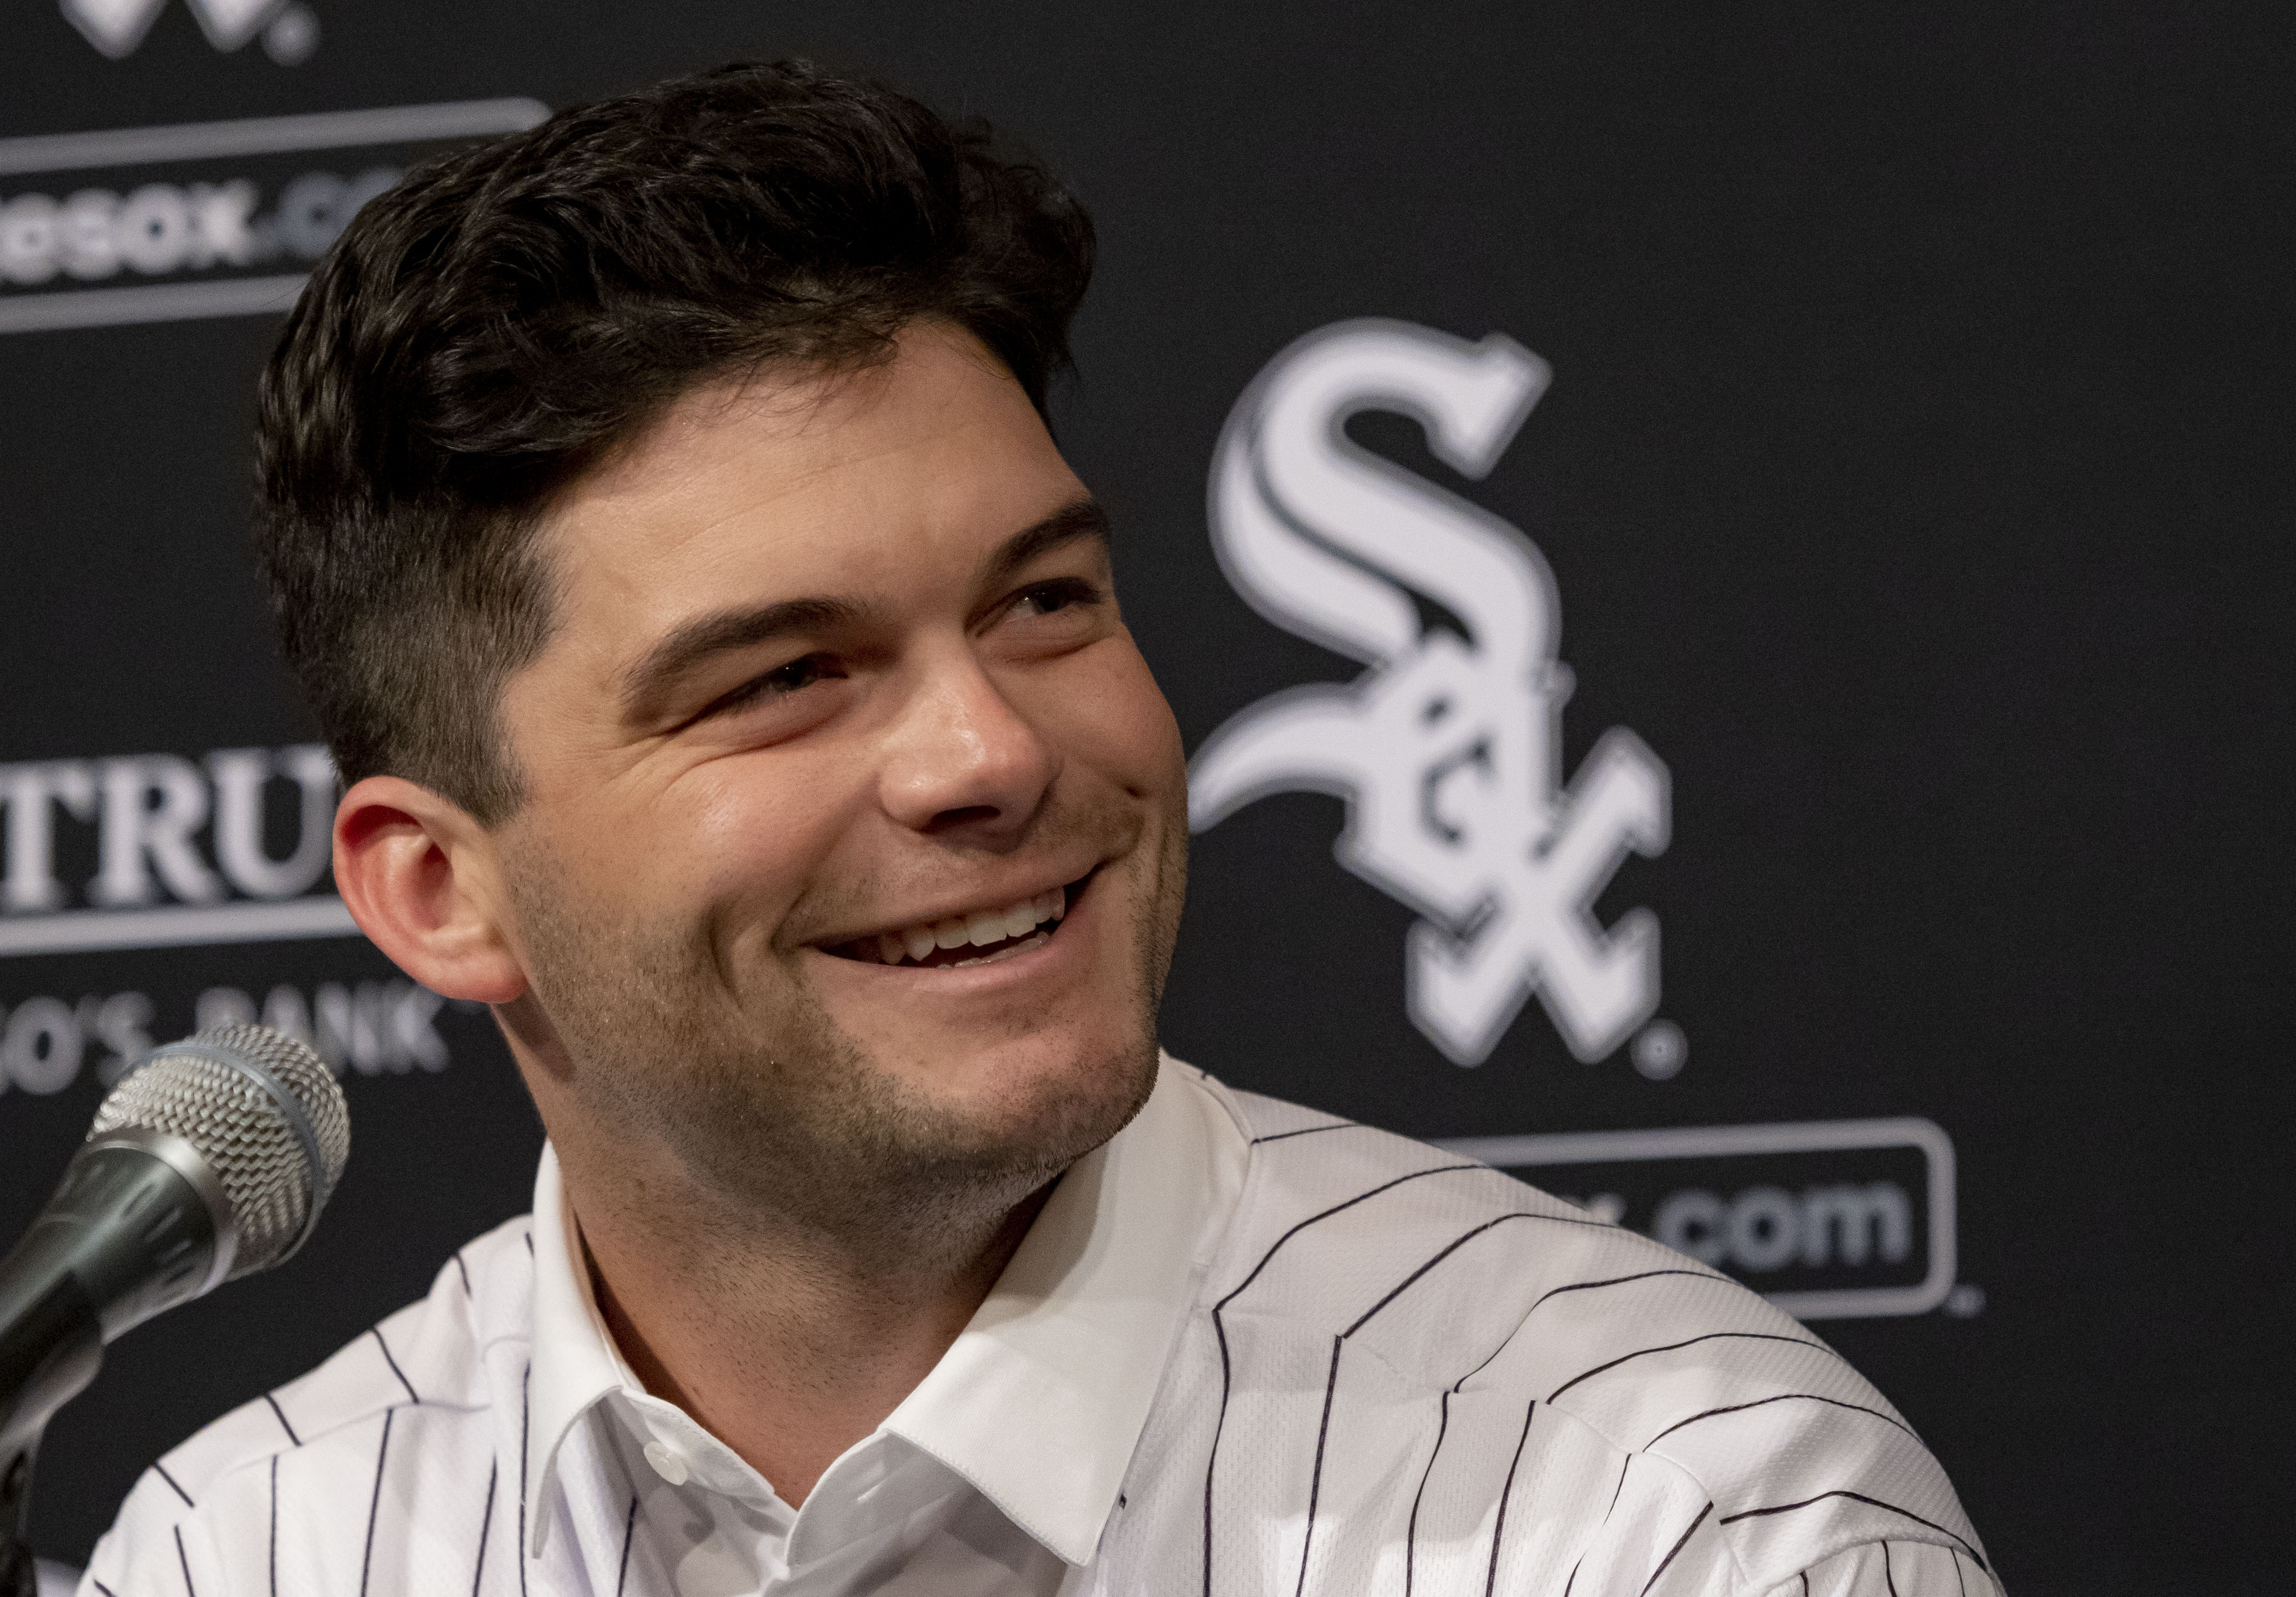 Did White Sox's Andrew Benintendi zing the Yankees during Chicago intro? 